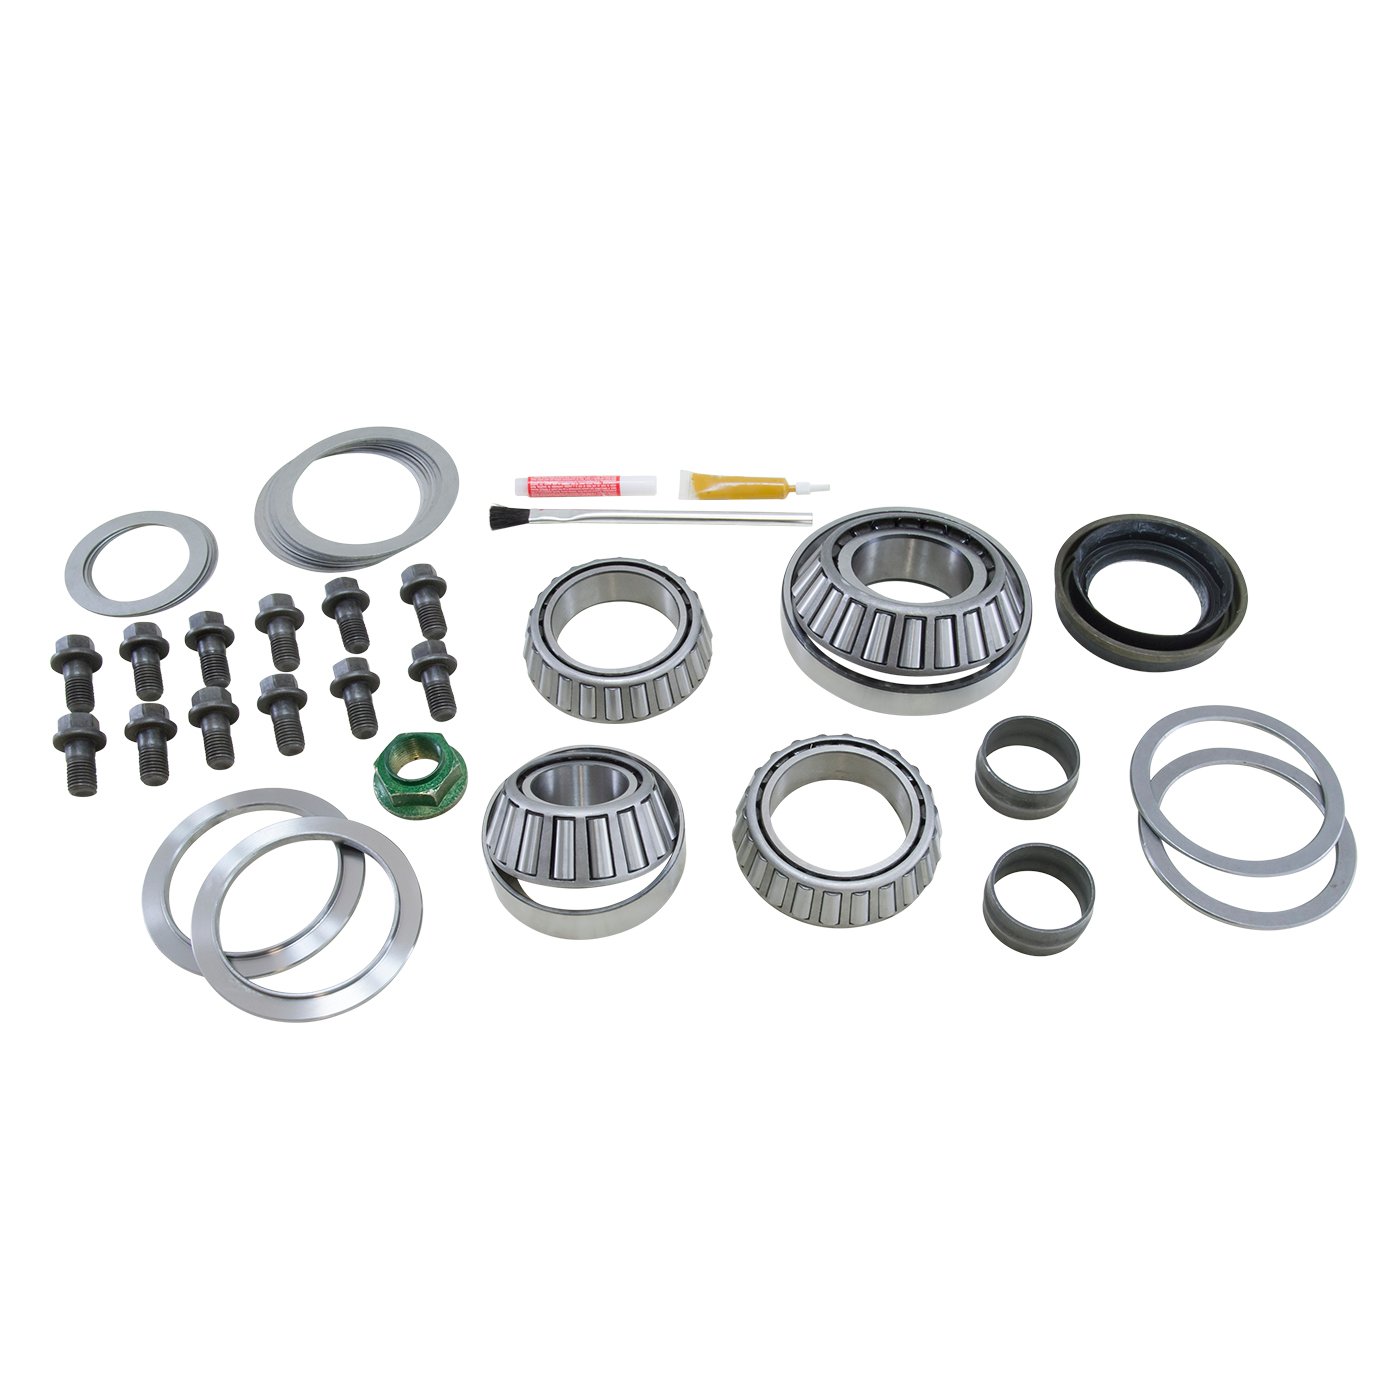 USA Standard ZK GM9.76 Master Overhaul Kit, For GM 9.76 in. Differential